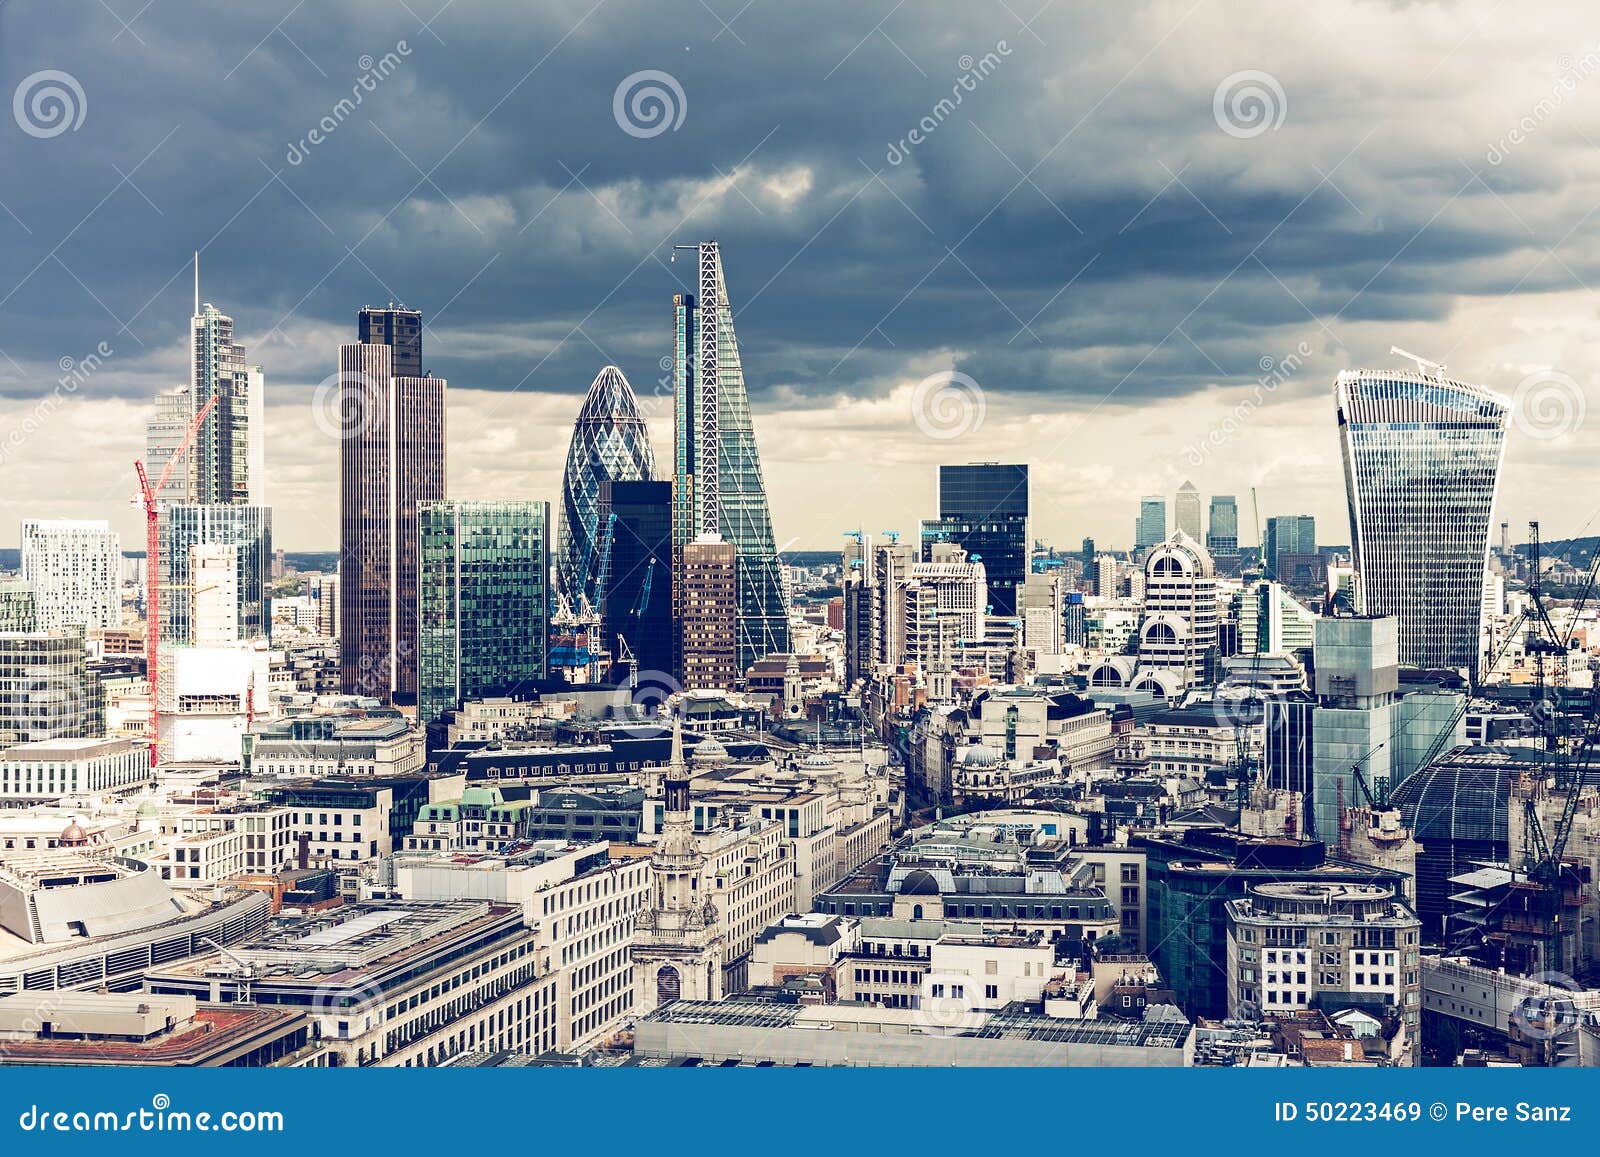 the city of london